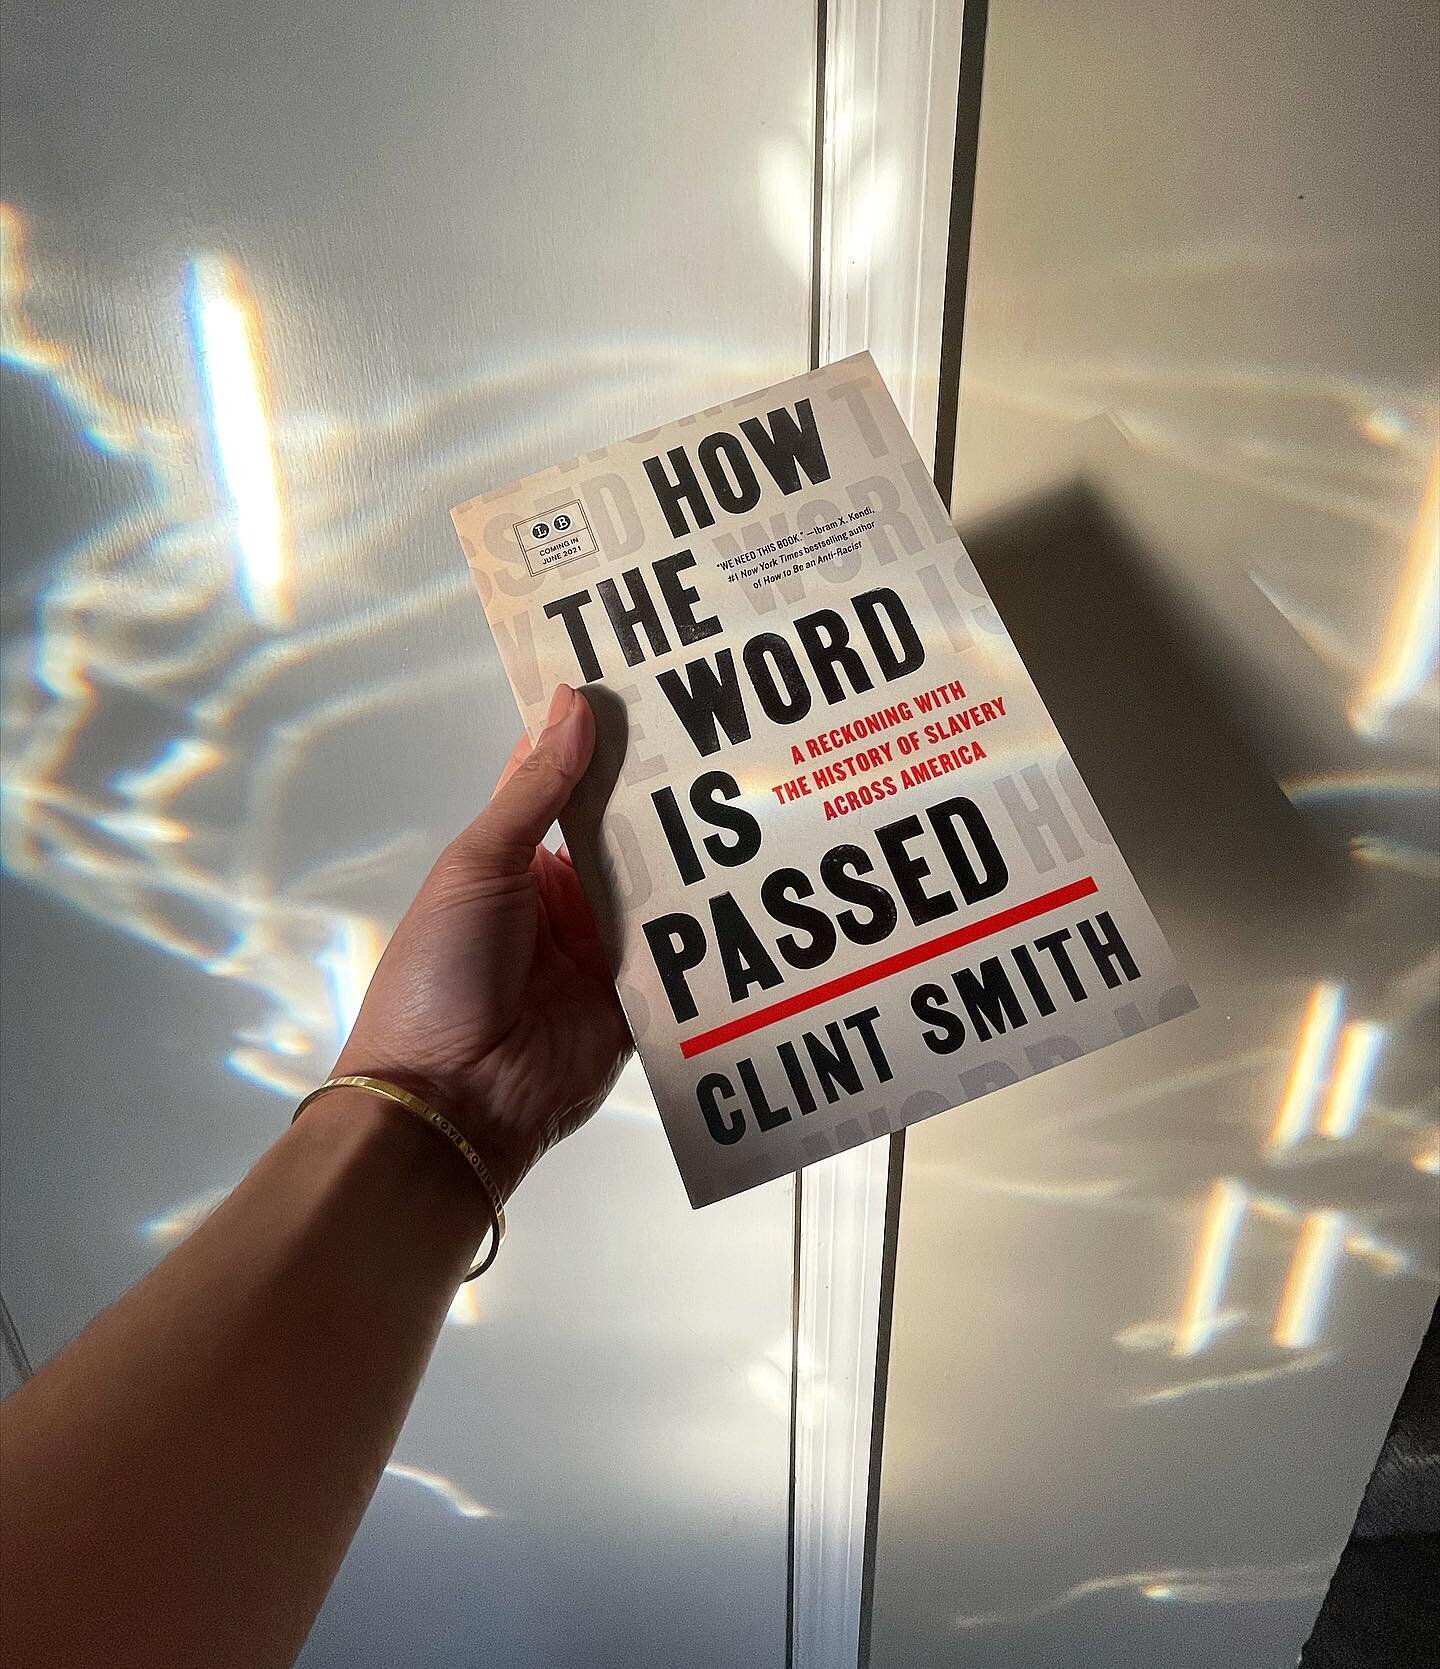 This is one of the most transformative books I have ever read. Thank you thank you @clintsmithiii for How The Word is Passed: A Reckoning With the History of Slavery Across America 

In its simplest distillation, How the Word is Passed is the story o